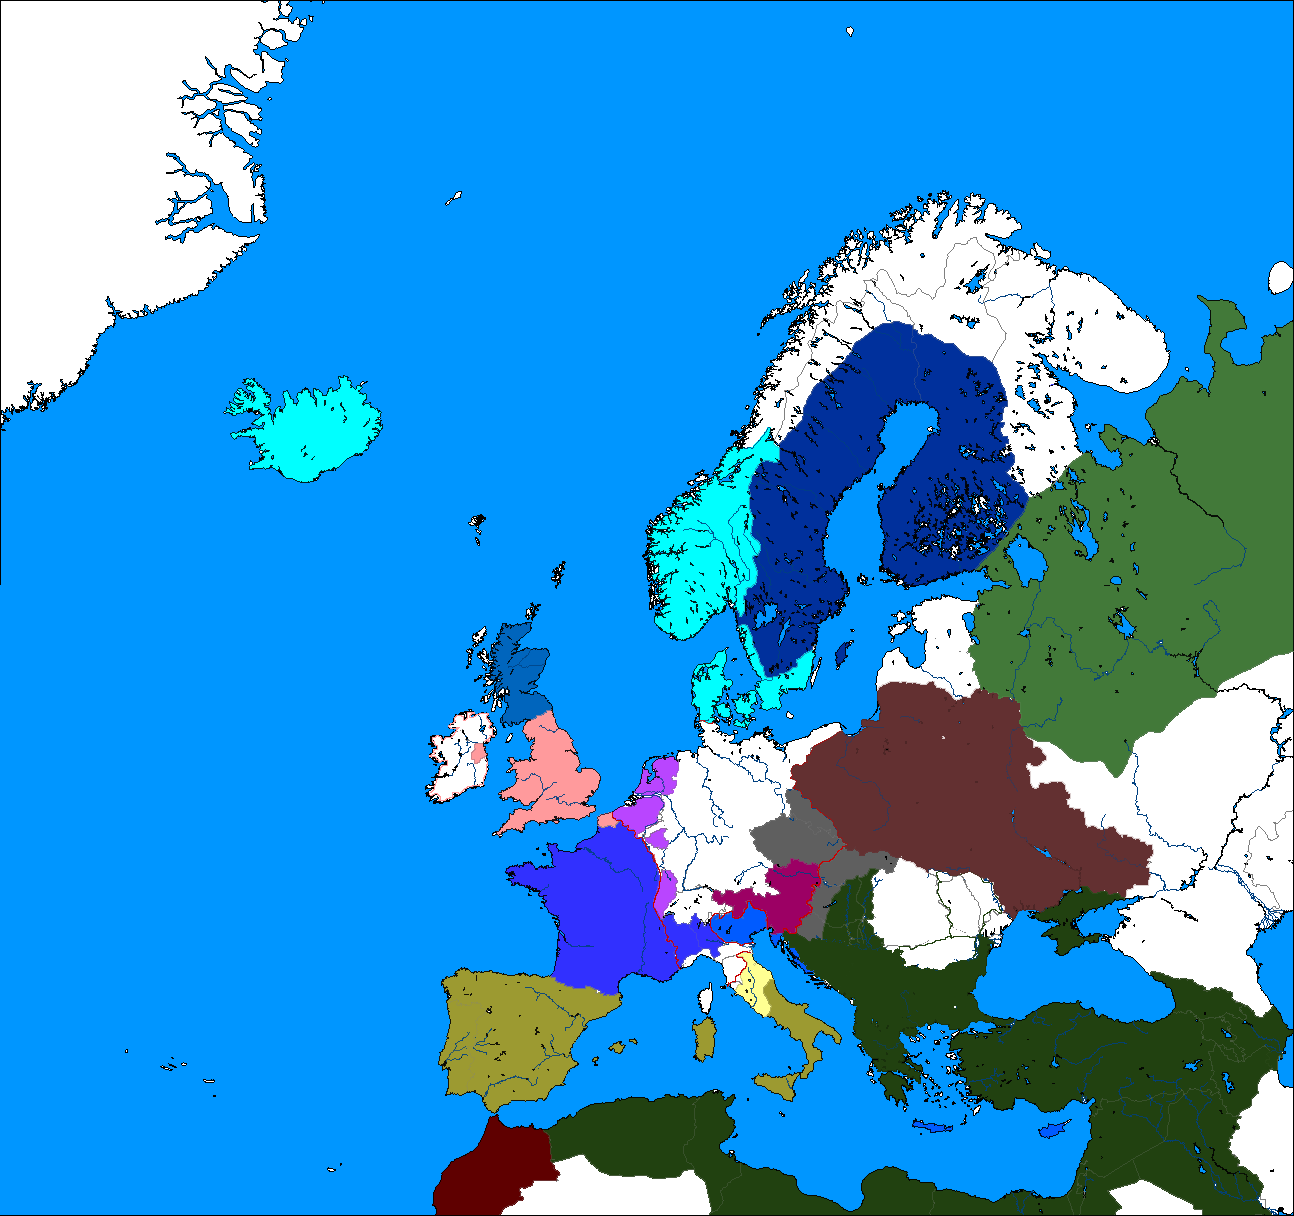 tlpeurope1540corrected.png